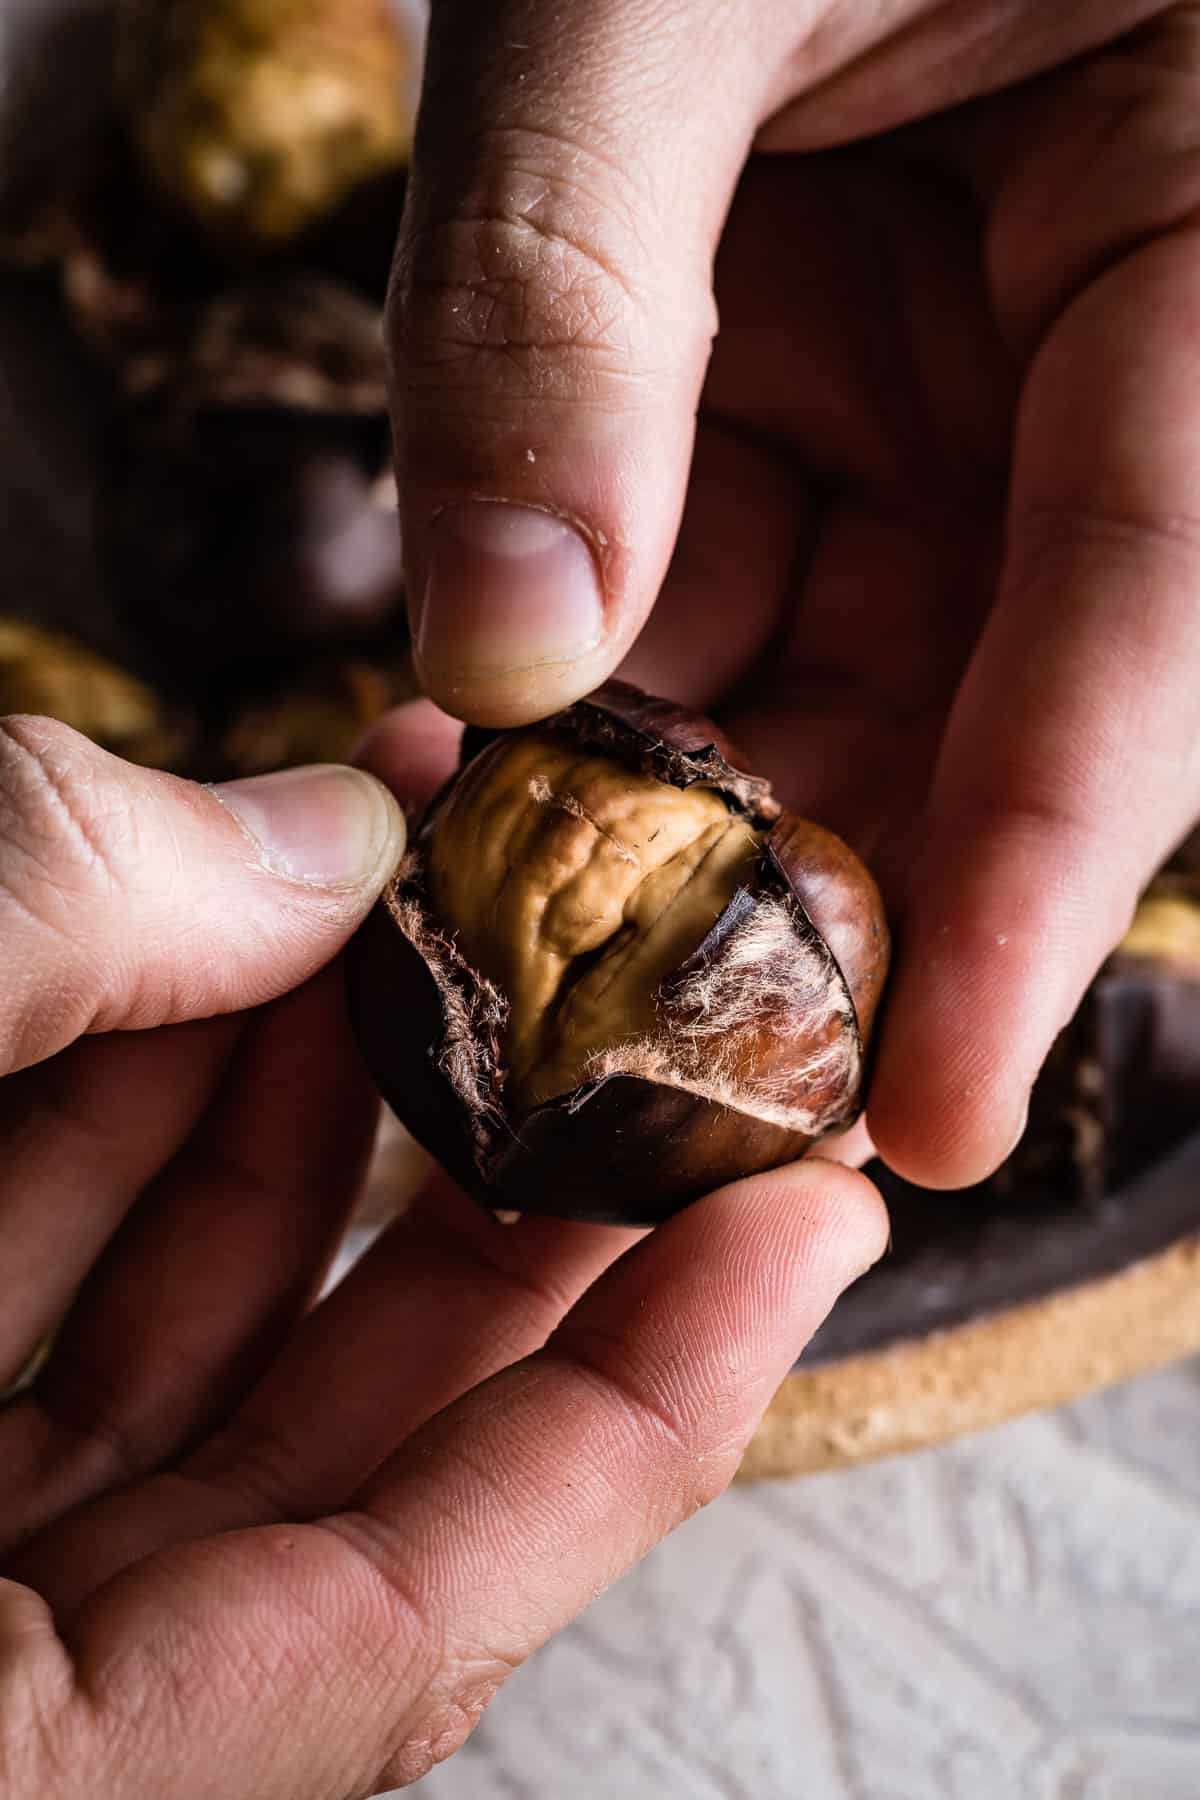 roasted chestnut being held by a person